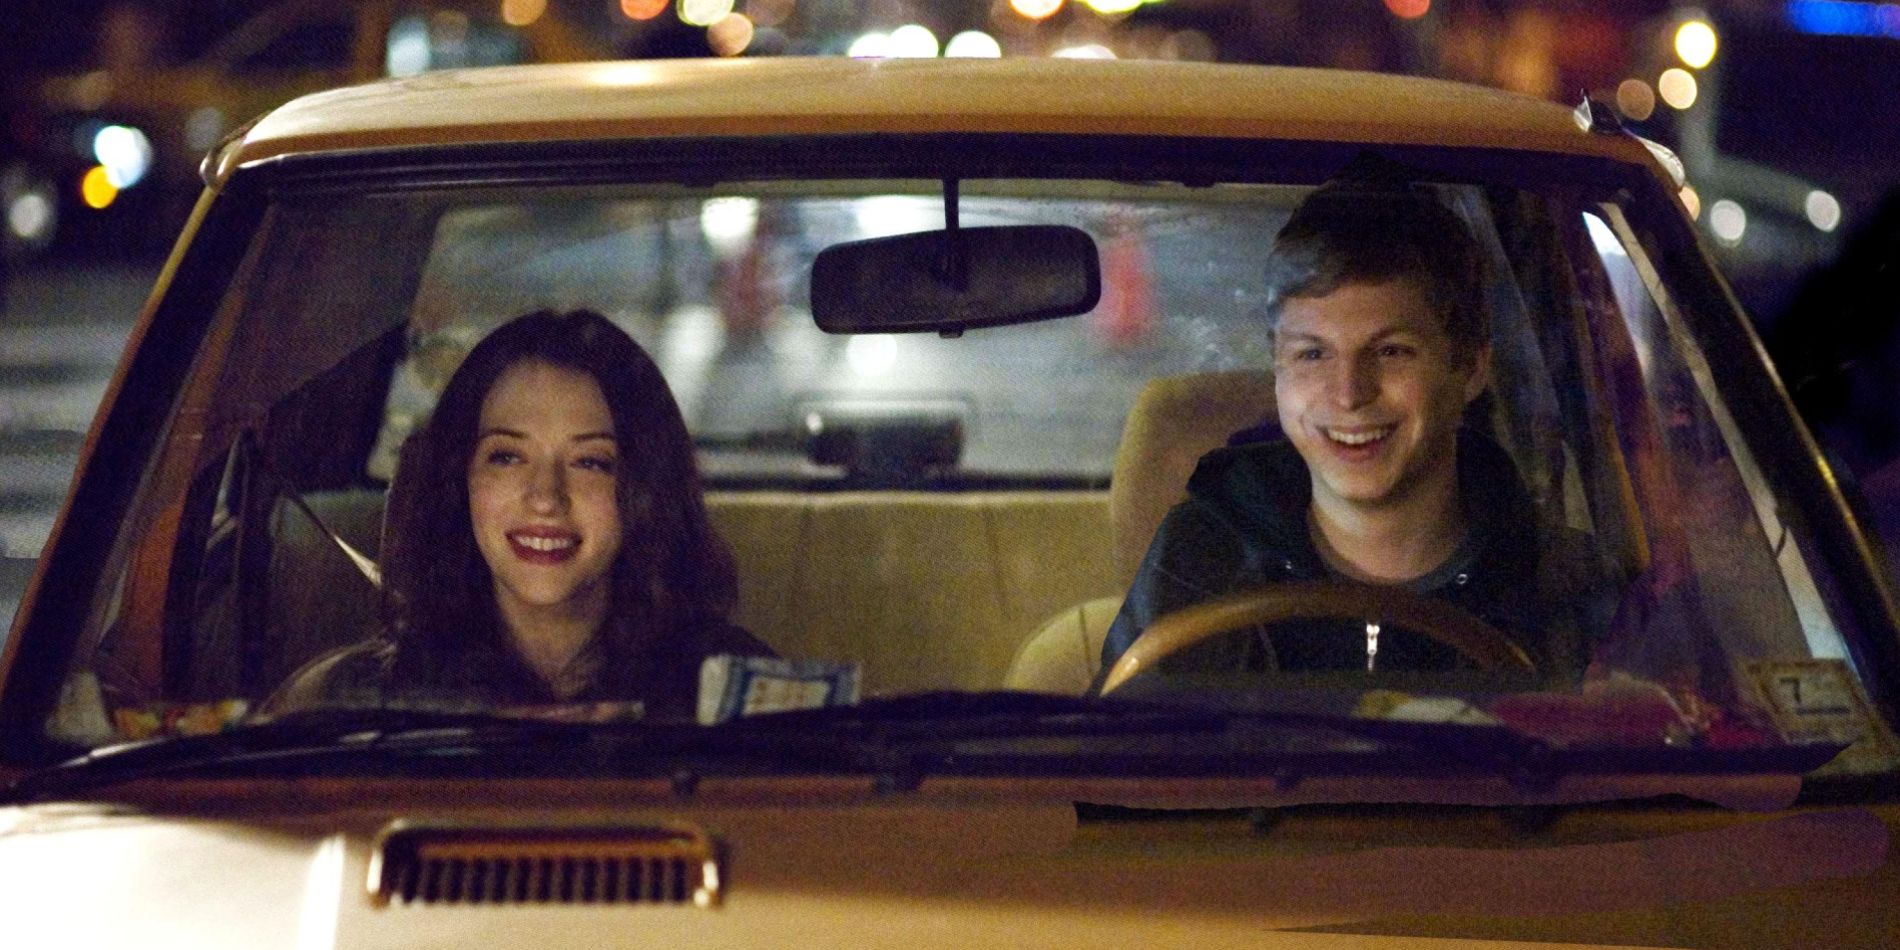 Norah and Nick talk in a car at night in Nick &amp; Norah's Infinite Playlist.